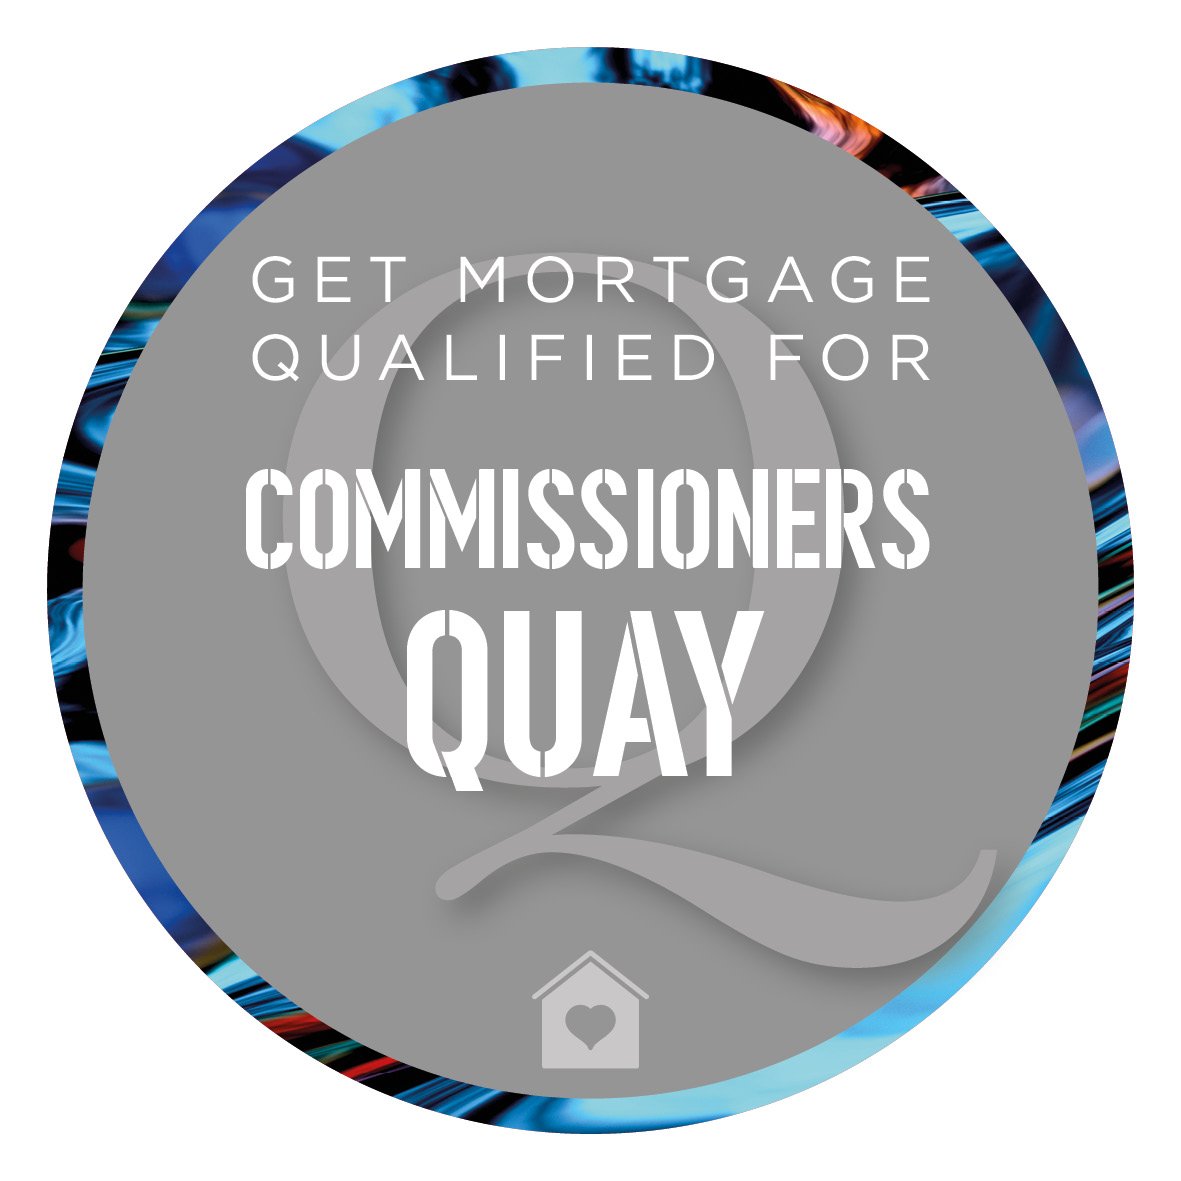 Get Mortgage Qualified at CQ3.jpg